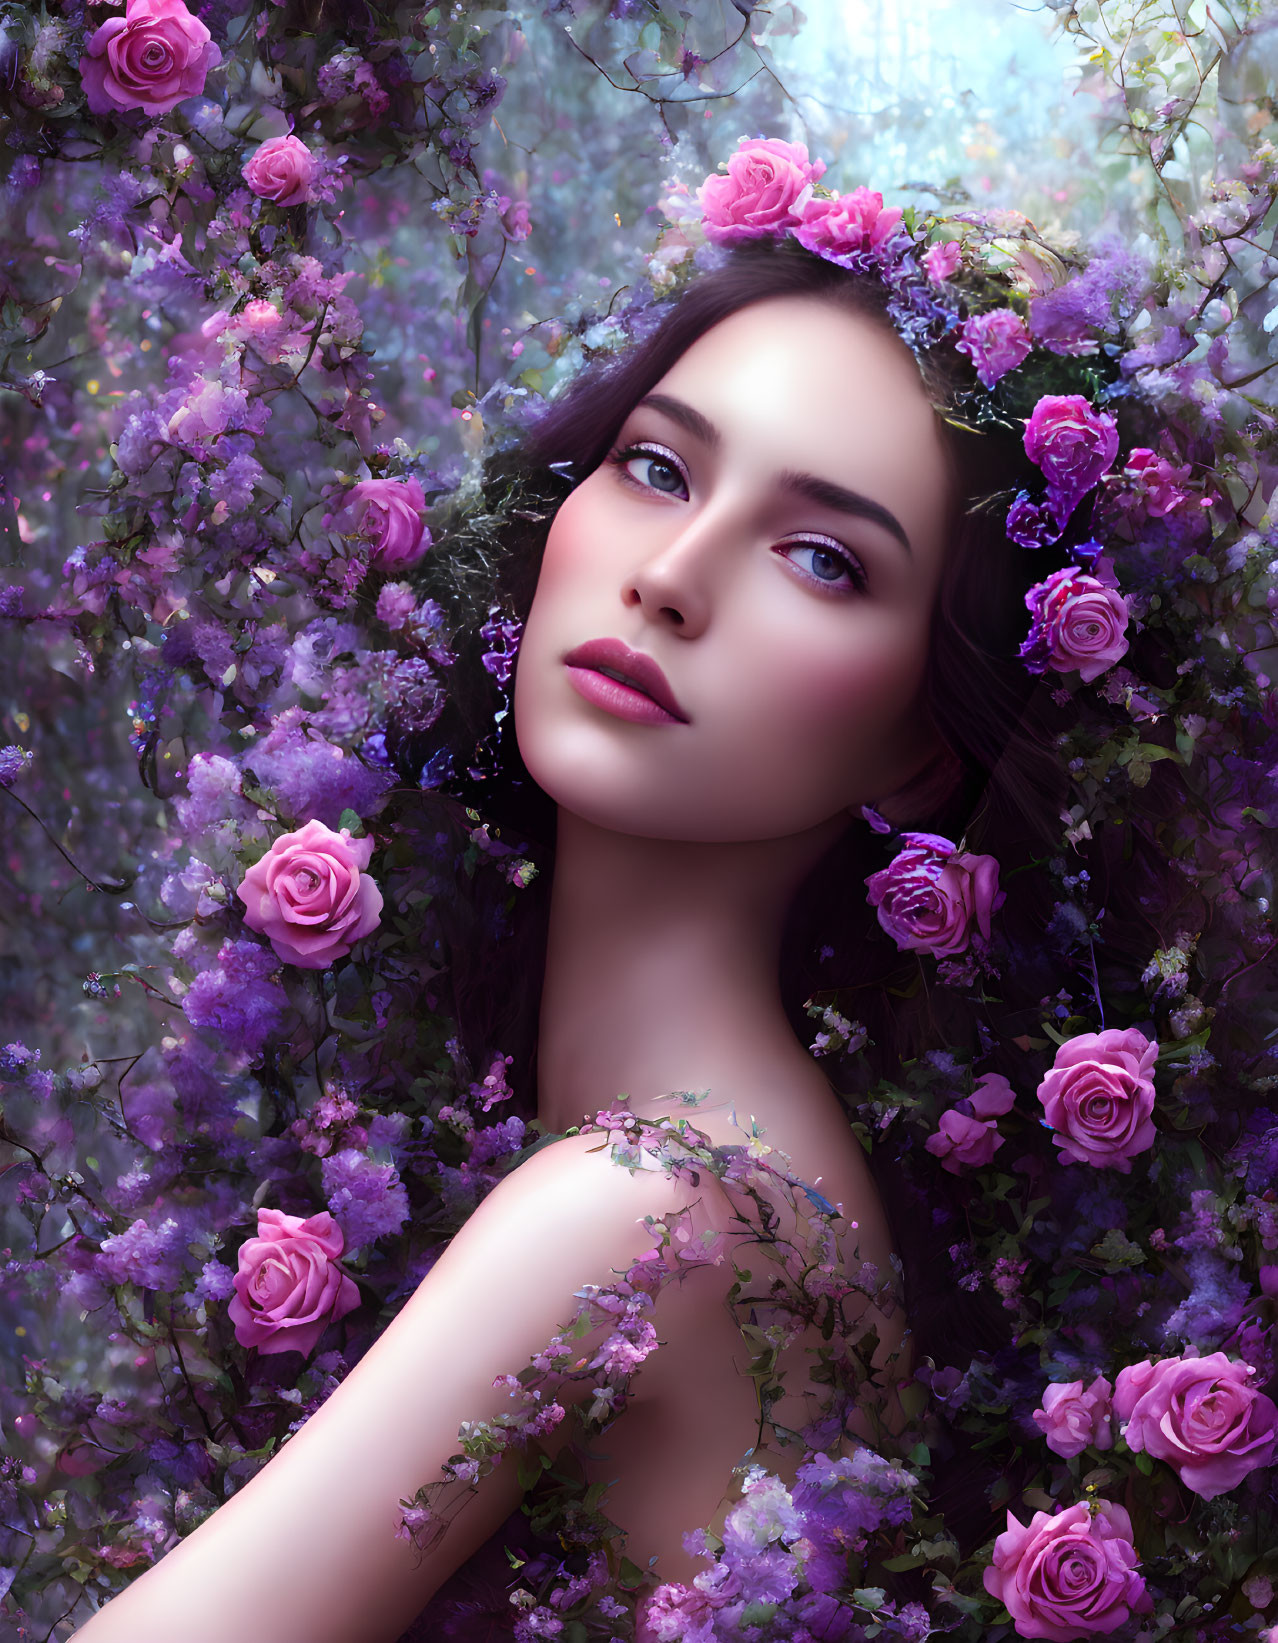 Woman with floral crown in serene setting among lilac and pink roses.